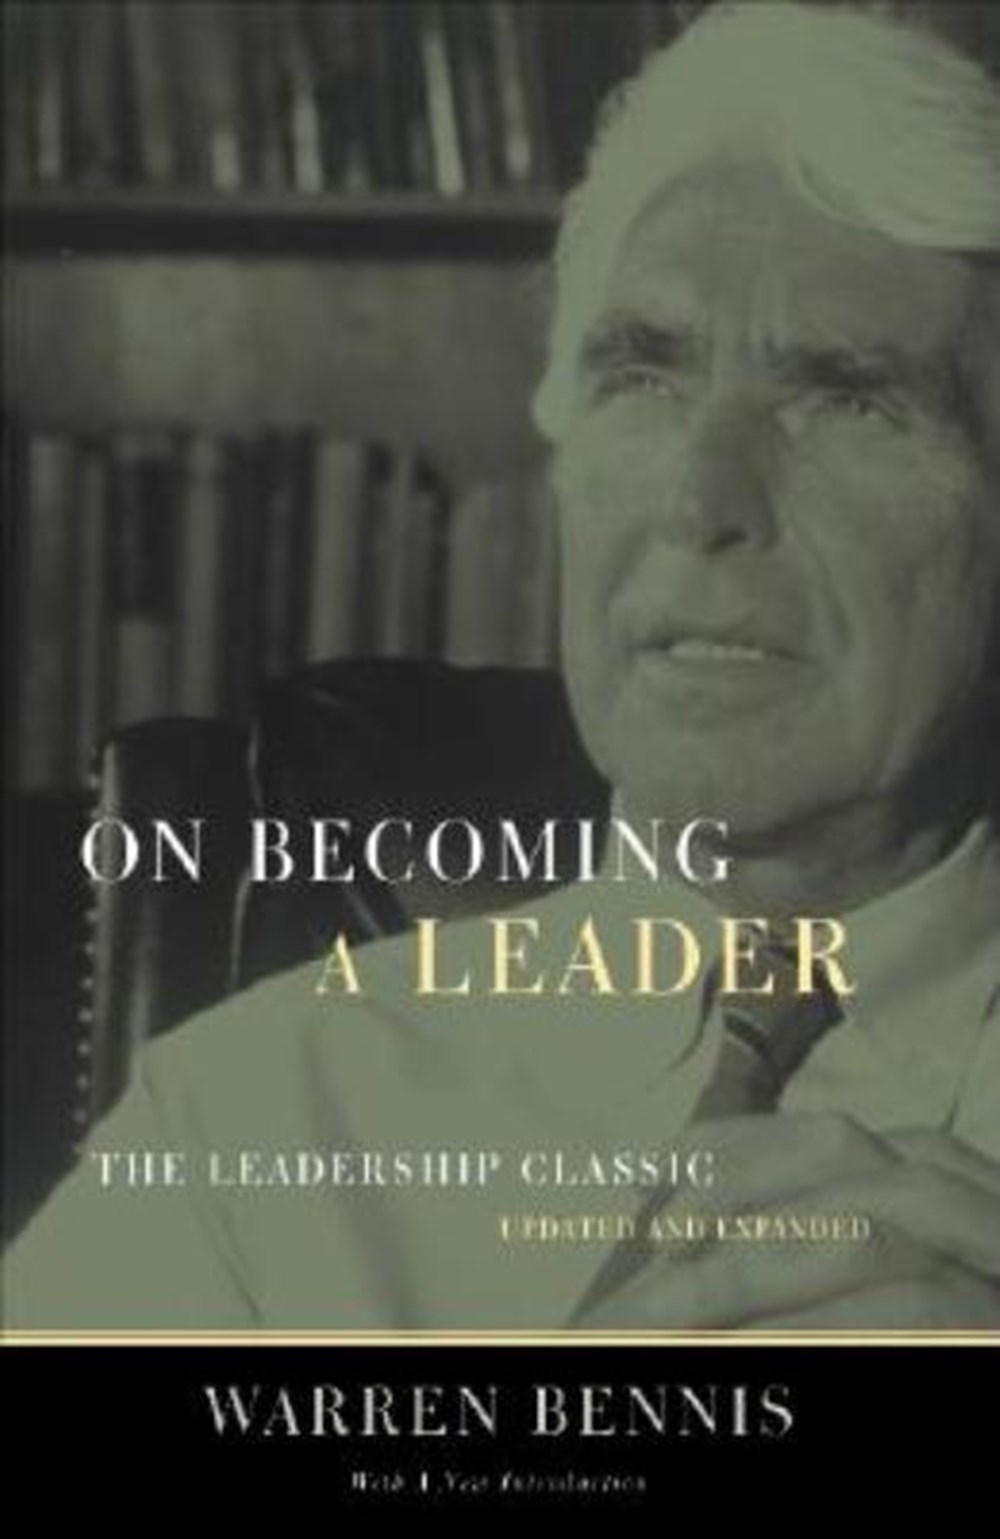 On Becoming a Leader The Leadership Classic (Updated and Expanded)